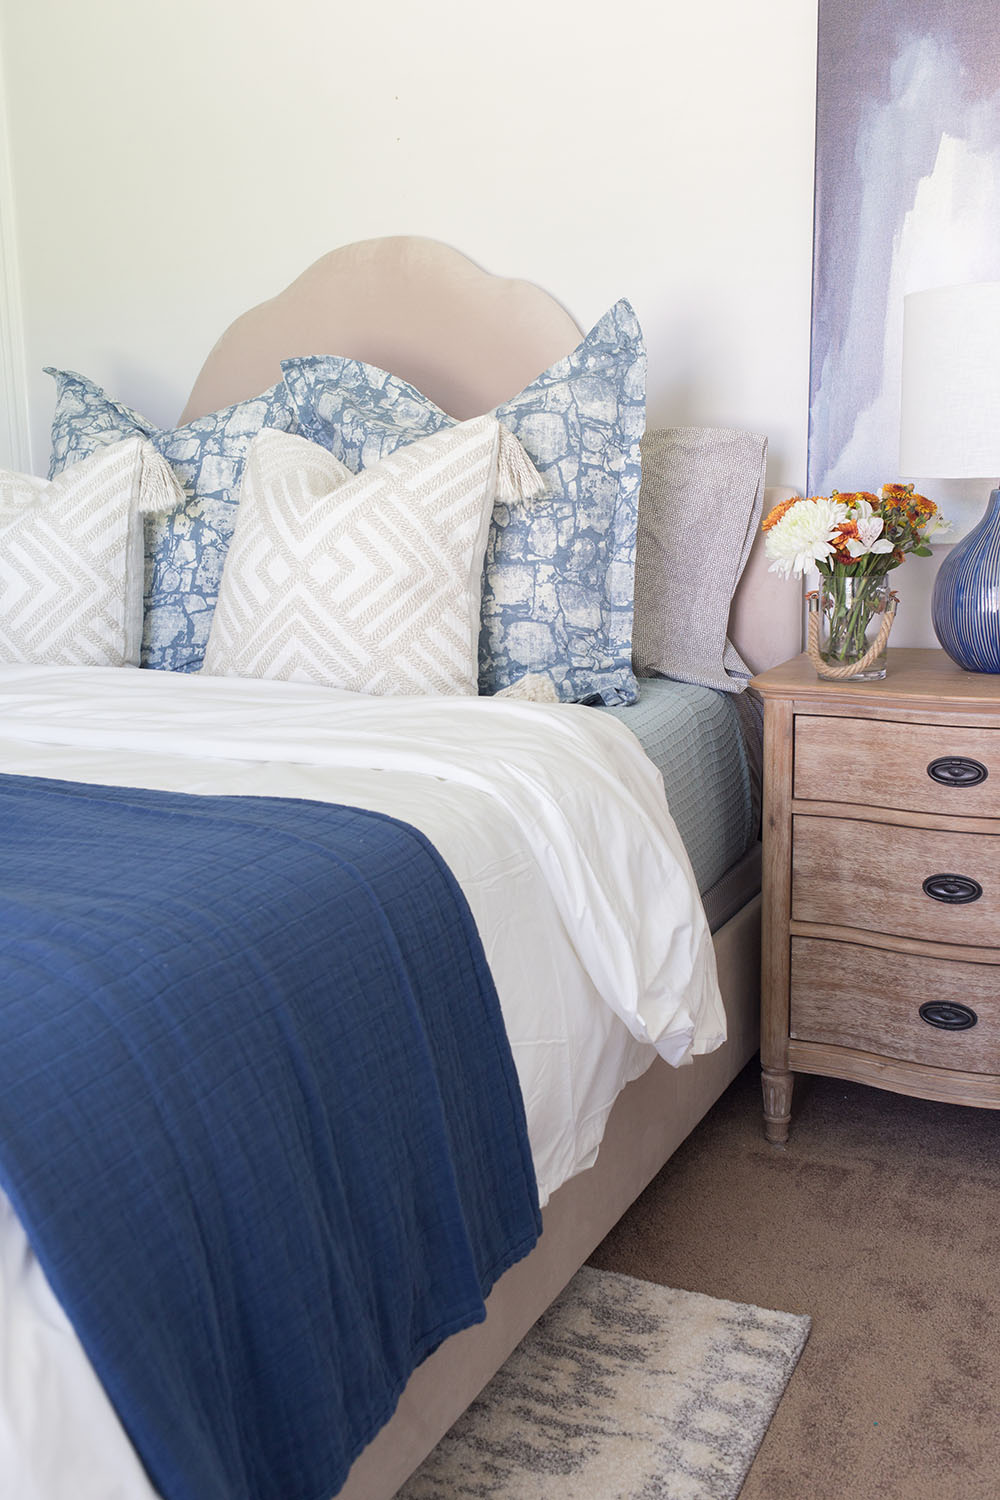 A guest bedroom decorated in light colors with blue accents.